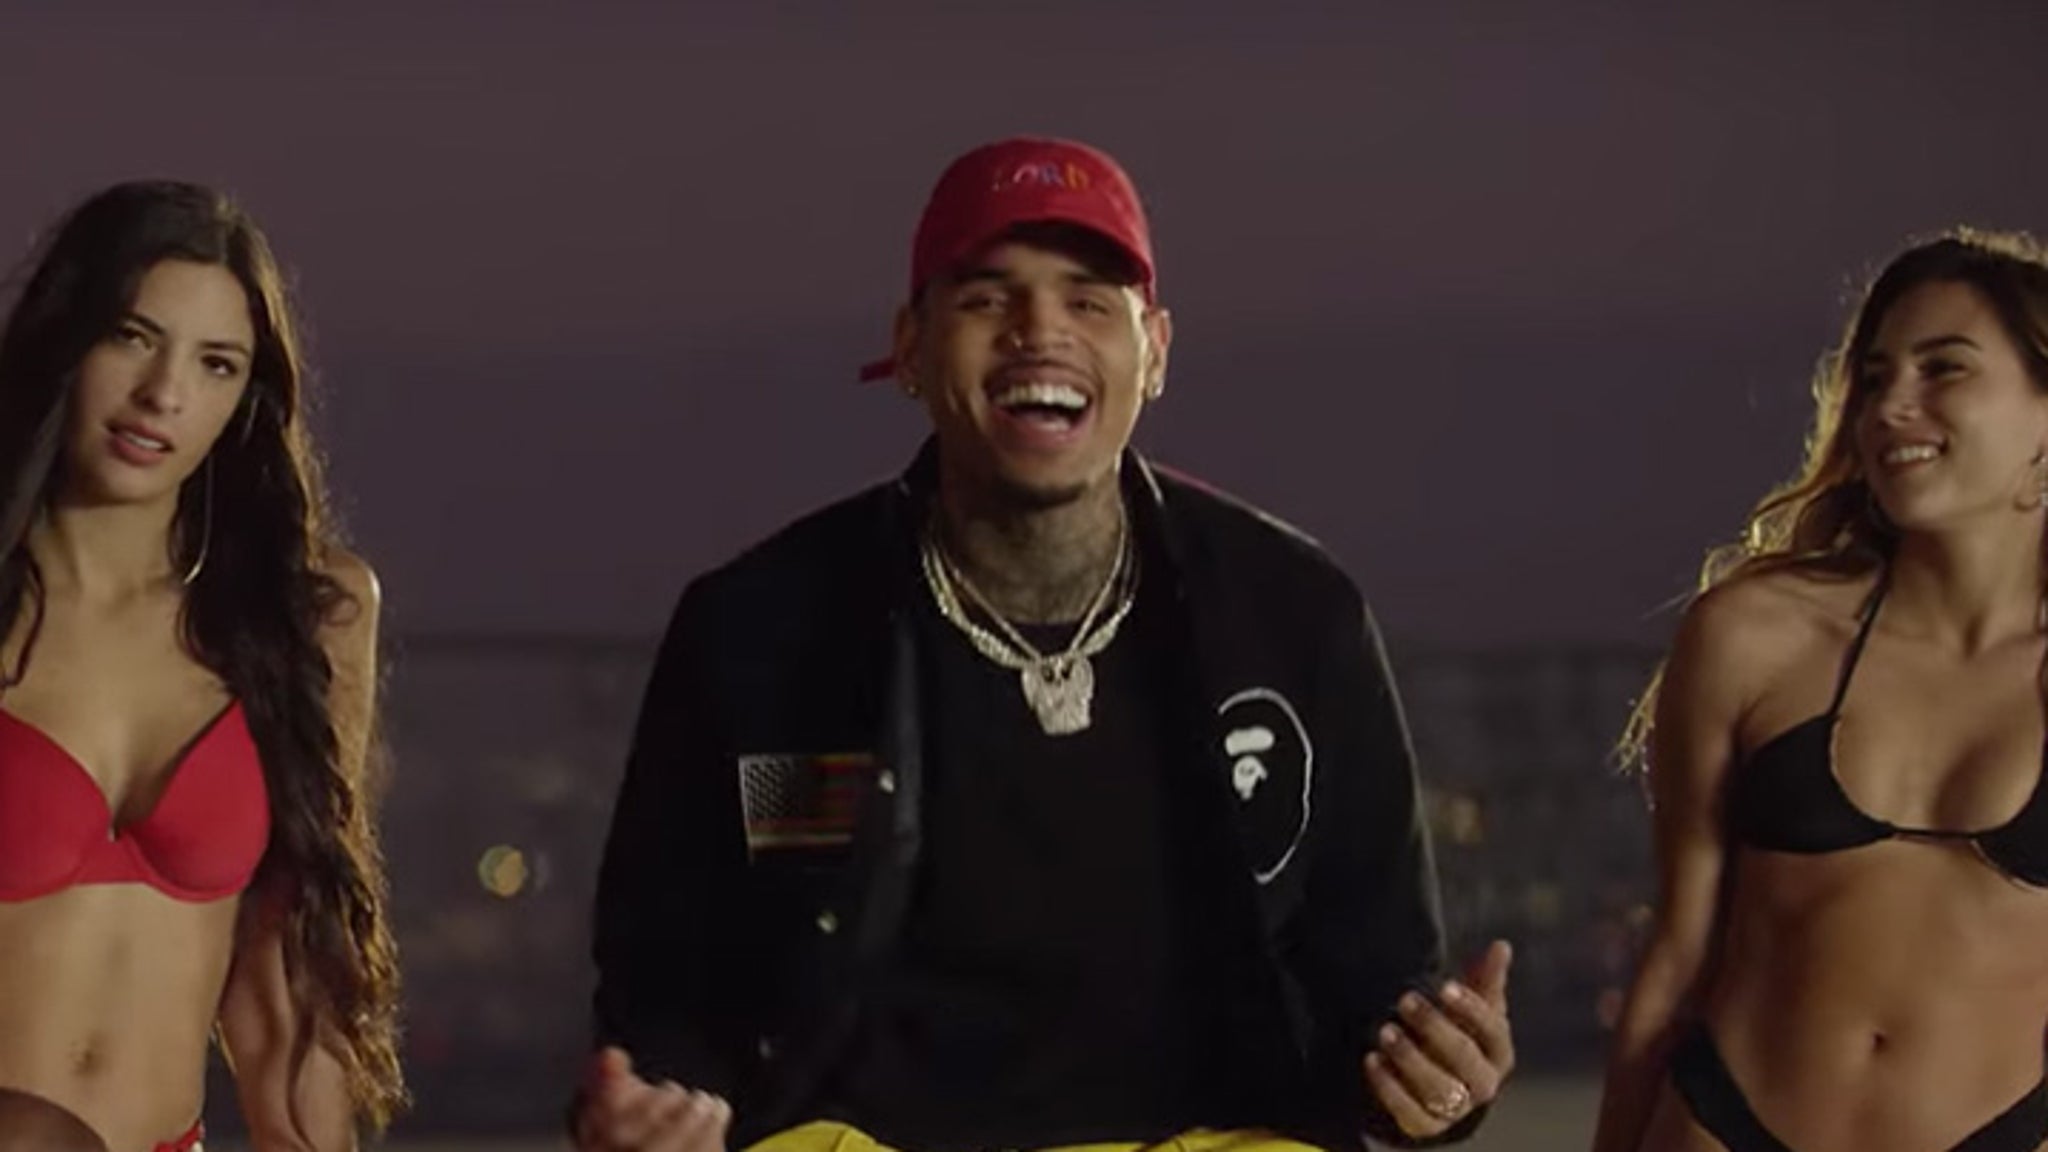 Dicky's Living Like Chris Brown for New 'Freaky Friday' Vid